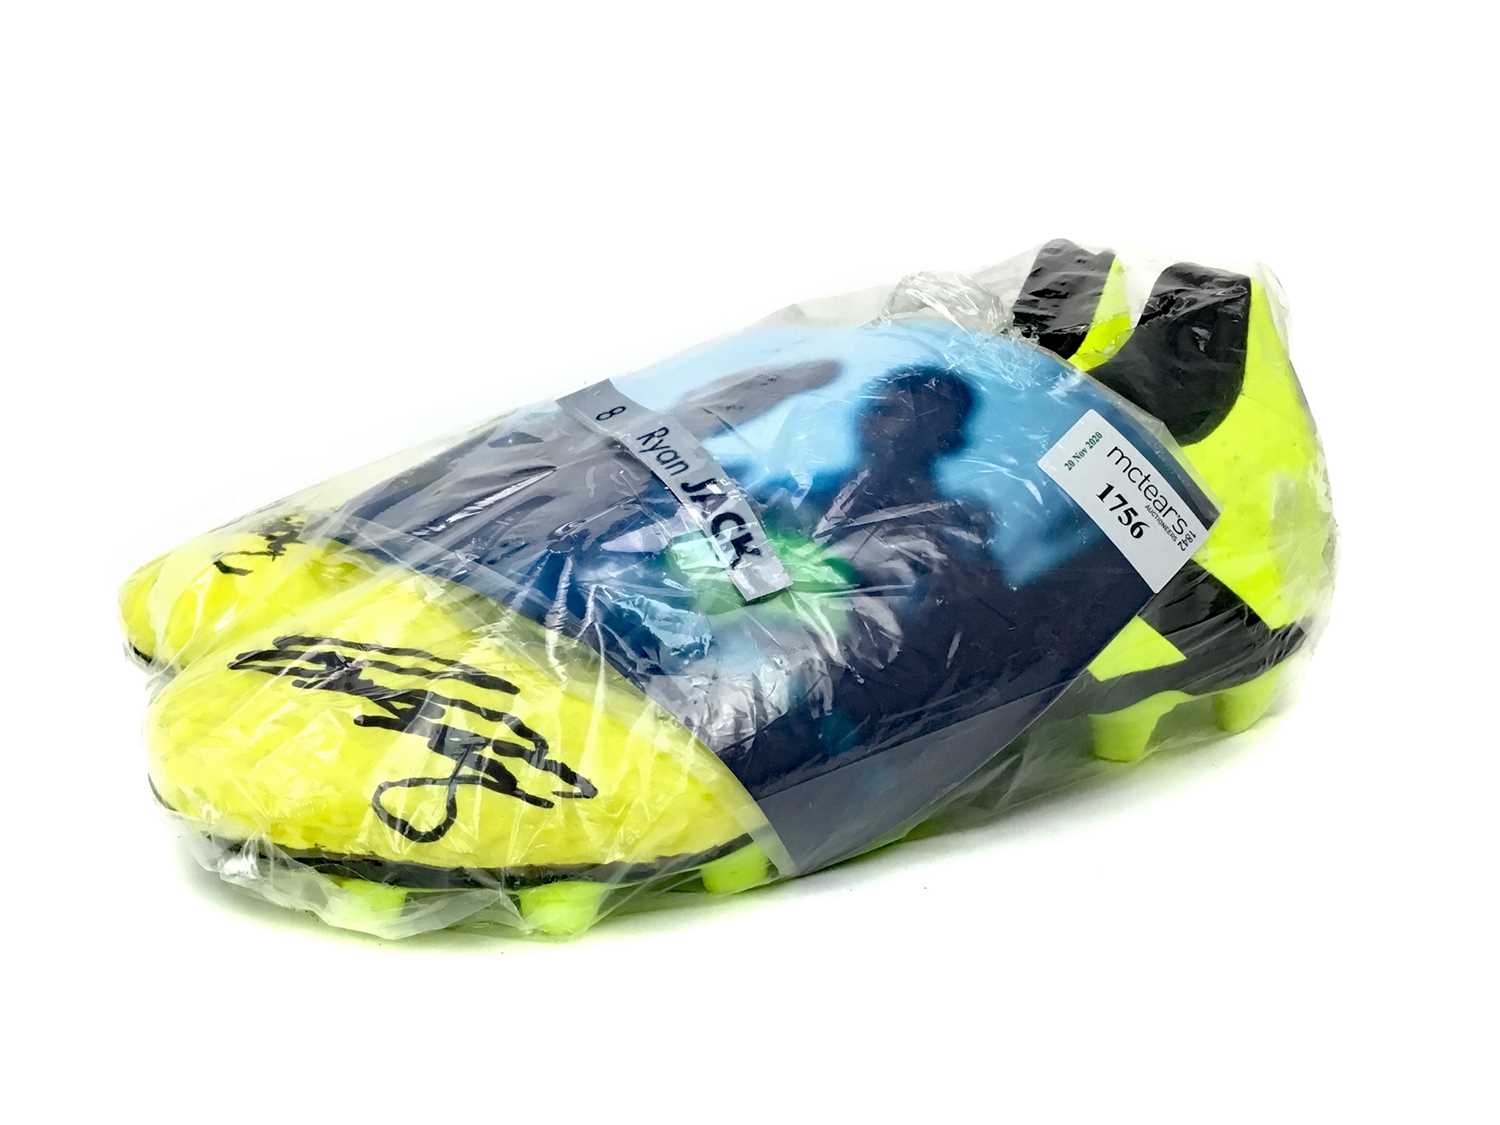 Lot 1756 - A PAIR OF FOOTBALL BOOTS SIGNED BY RYAN JACK OF RANGERS F.C.